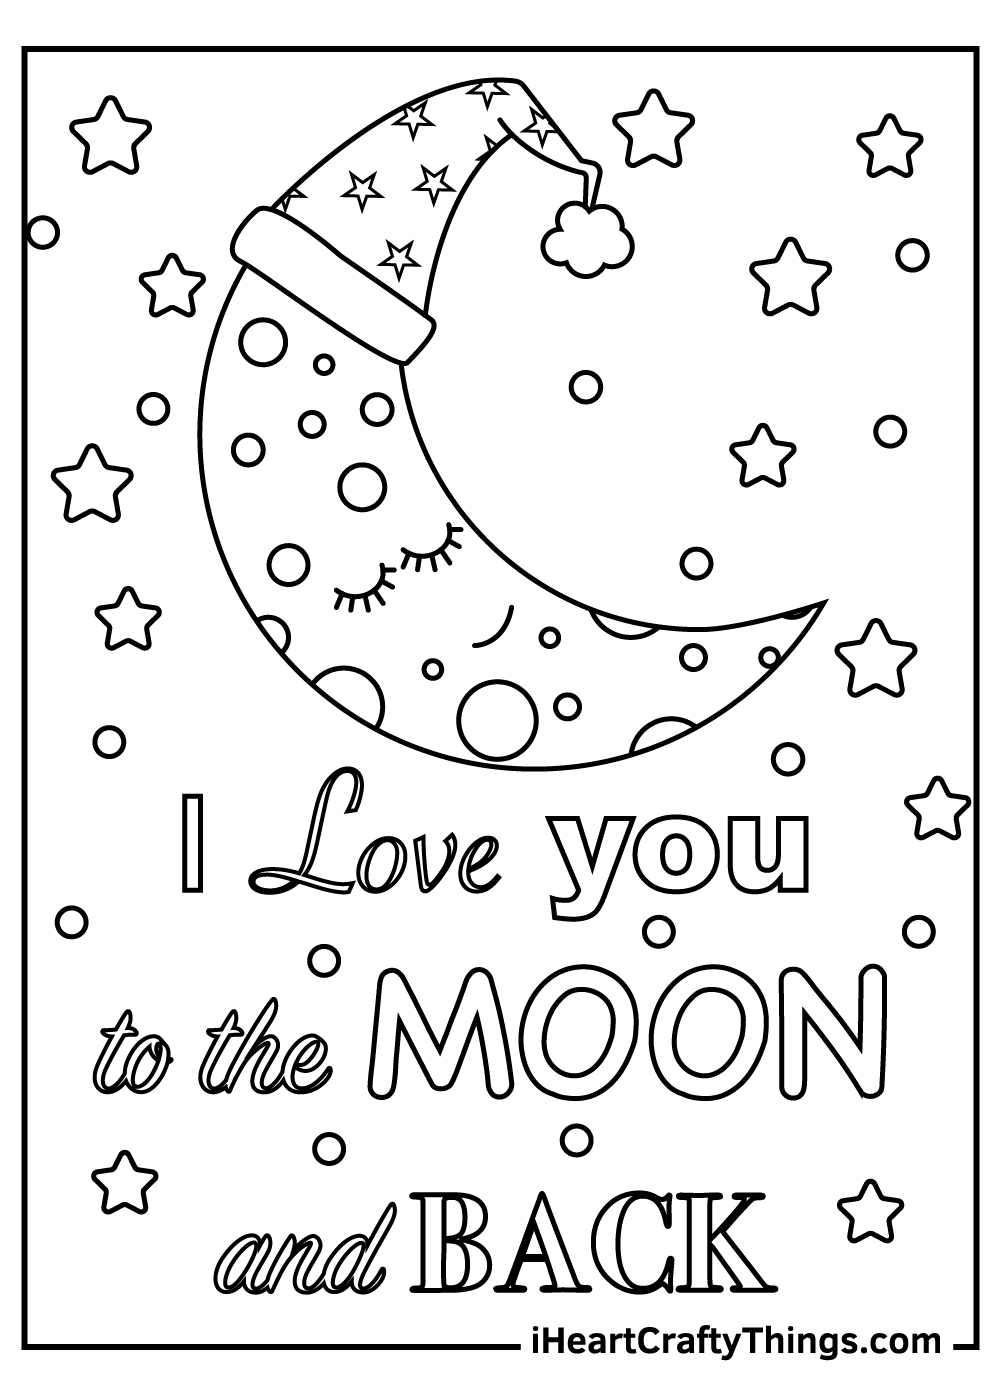 I love you to the moon and back coloring pages 